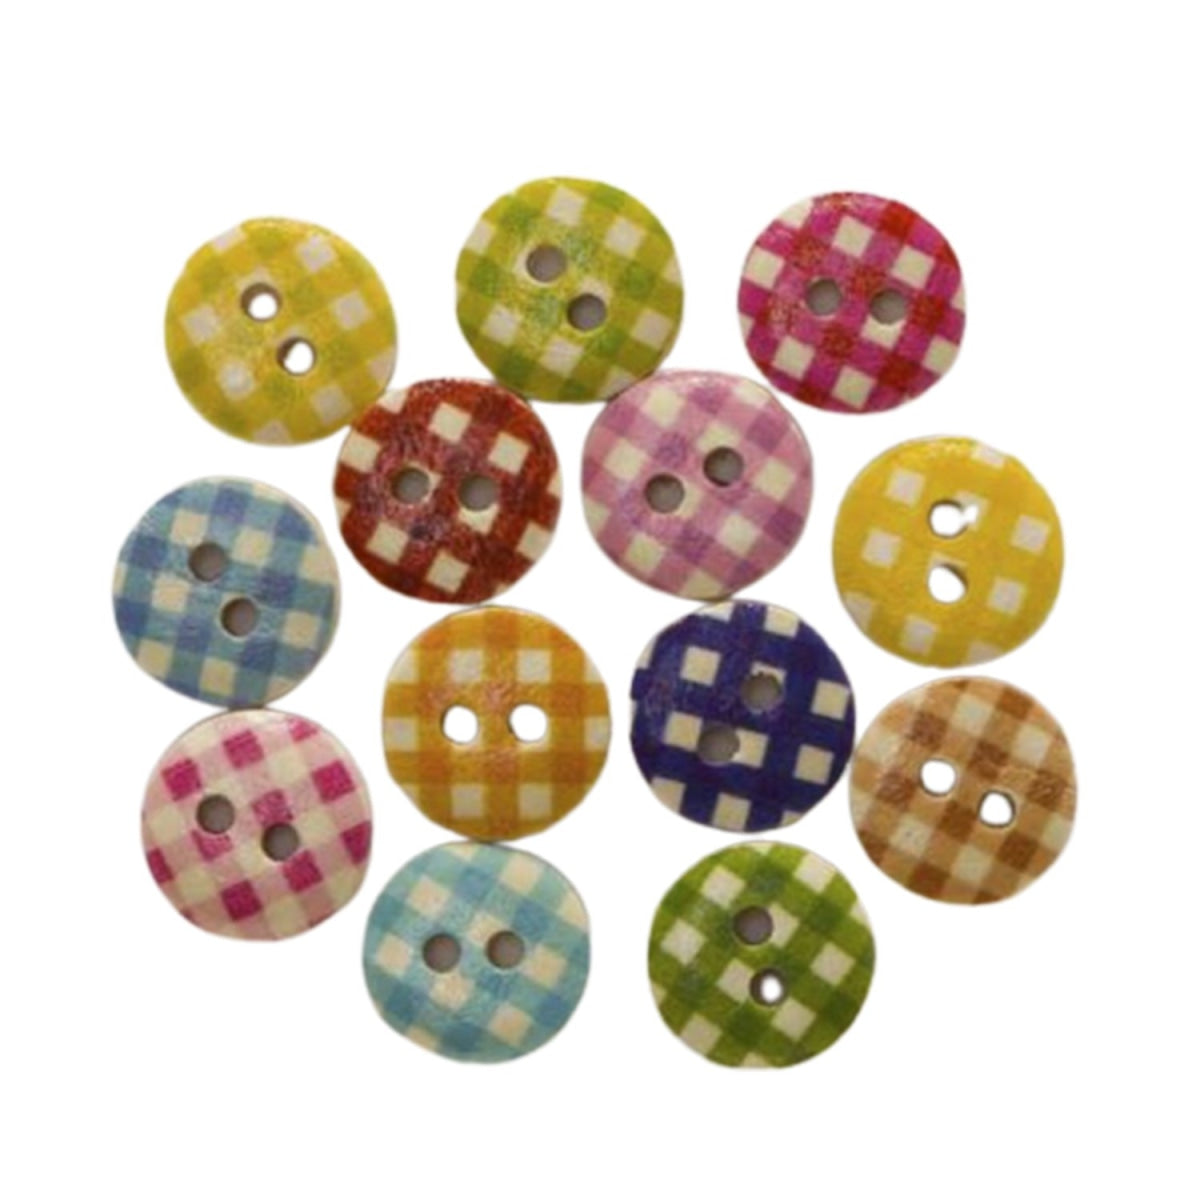 50Pcs 11-18Mm Grid Pattern Wooden Buttons Sewing Scrapbooking Clothing Crafts Wood Button 11.5Mm